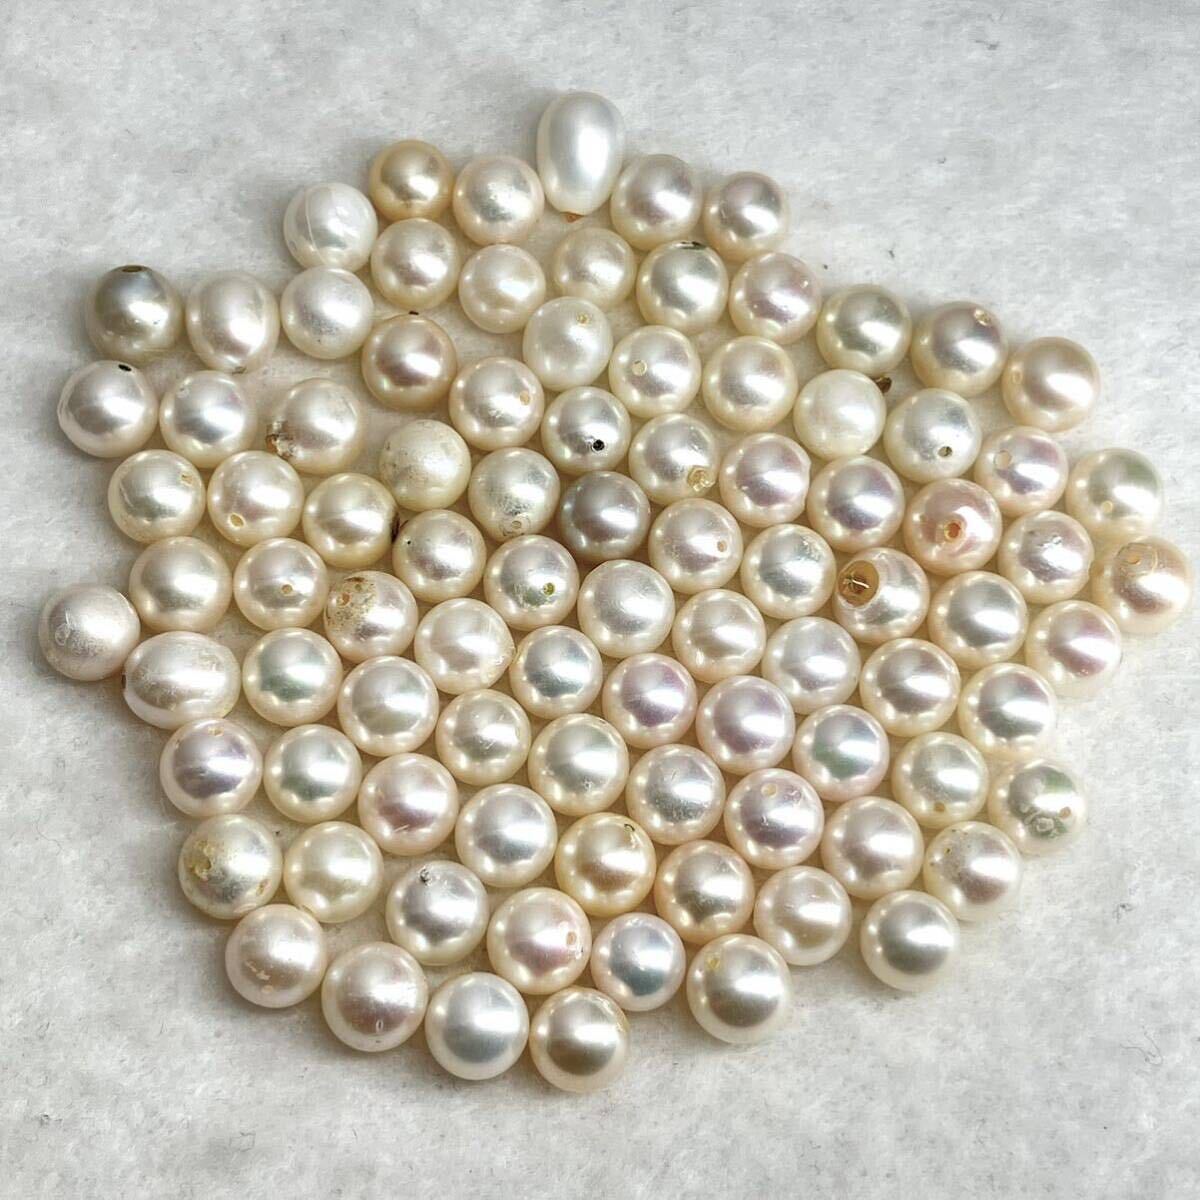  large amount!!*book@ pearl . summarize *A 50g/250ct approximately 6.6-7.4mm. loose unset jewel gem jewelry jewelry Pearl pearl ③